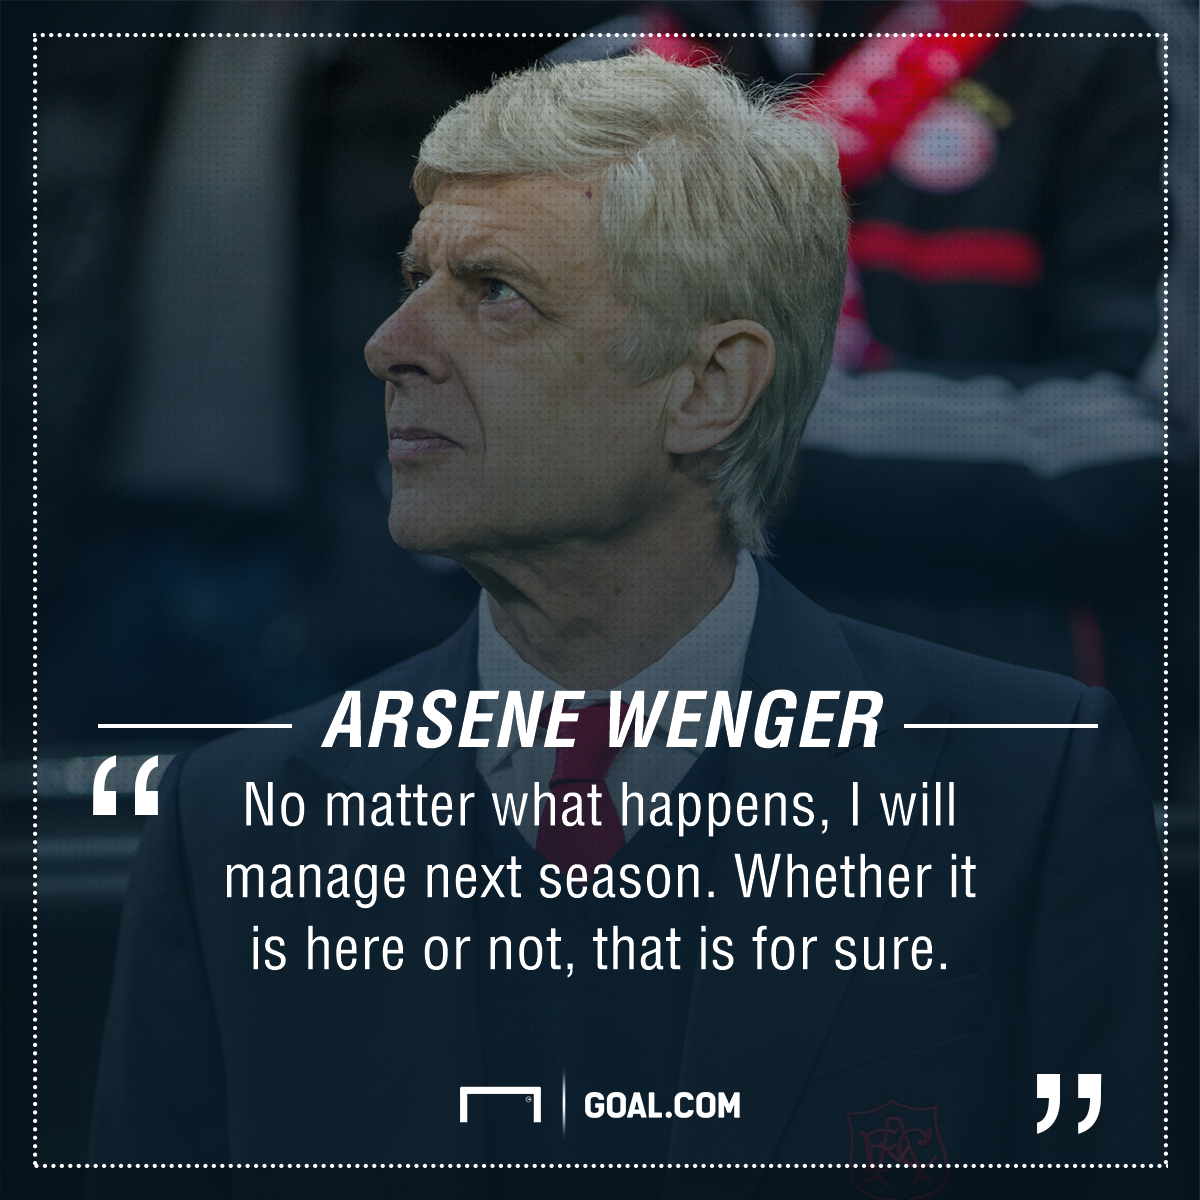 Please retire, Arsene - before you destroy your legacy | Goal.com